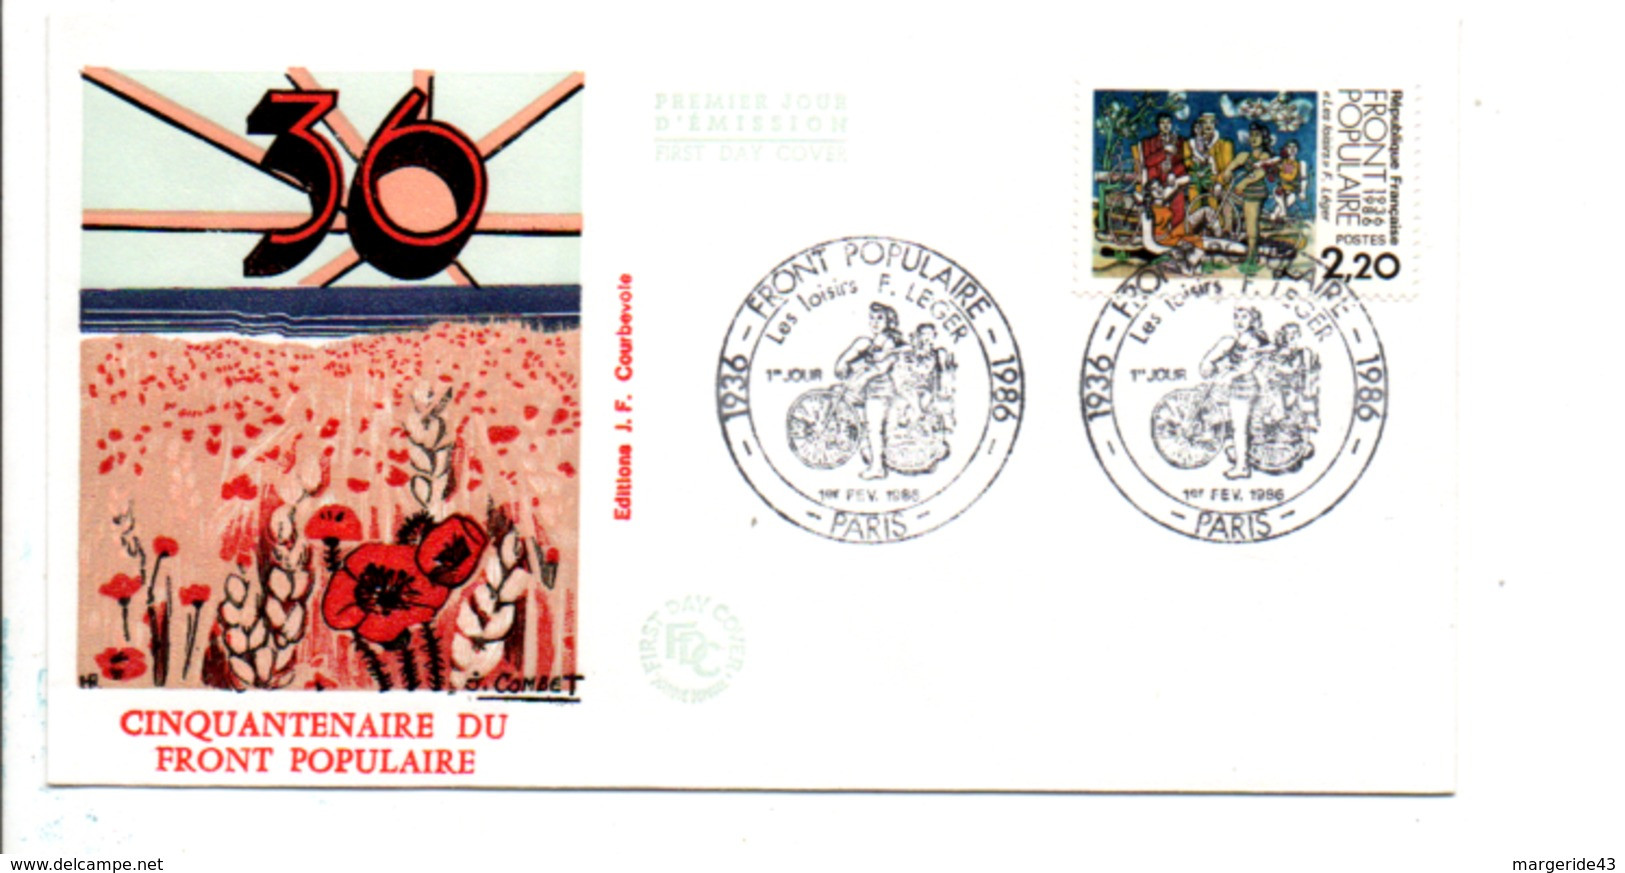 FDC 1986 FRONT POPULAIRE - 1980-1989